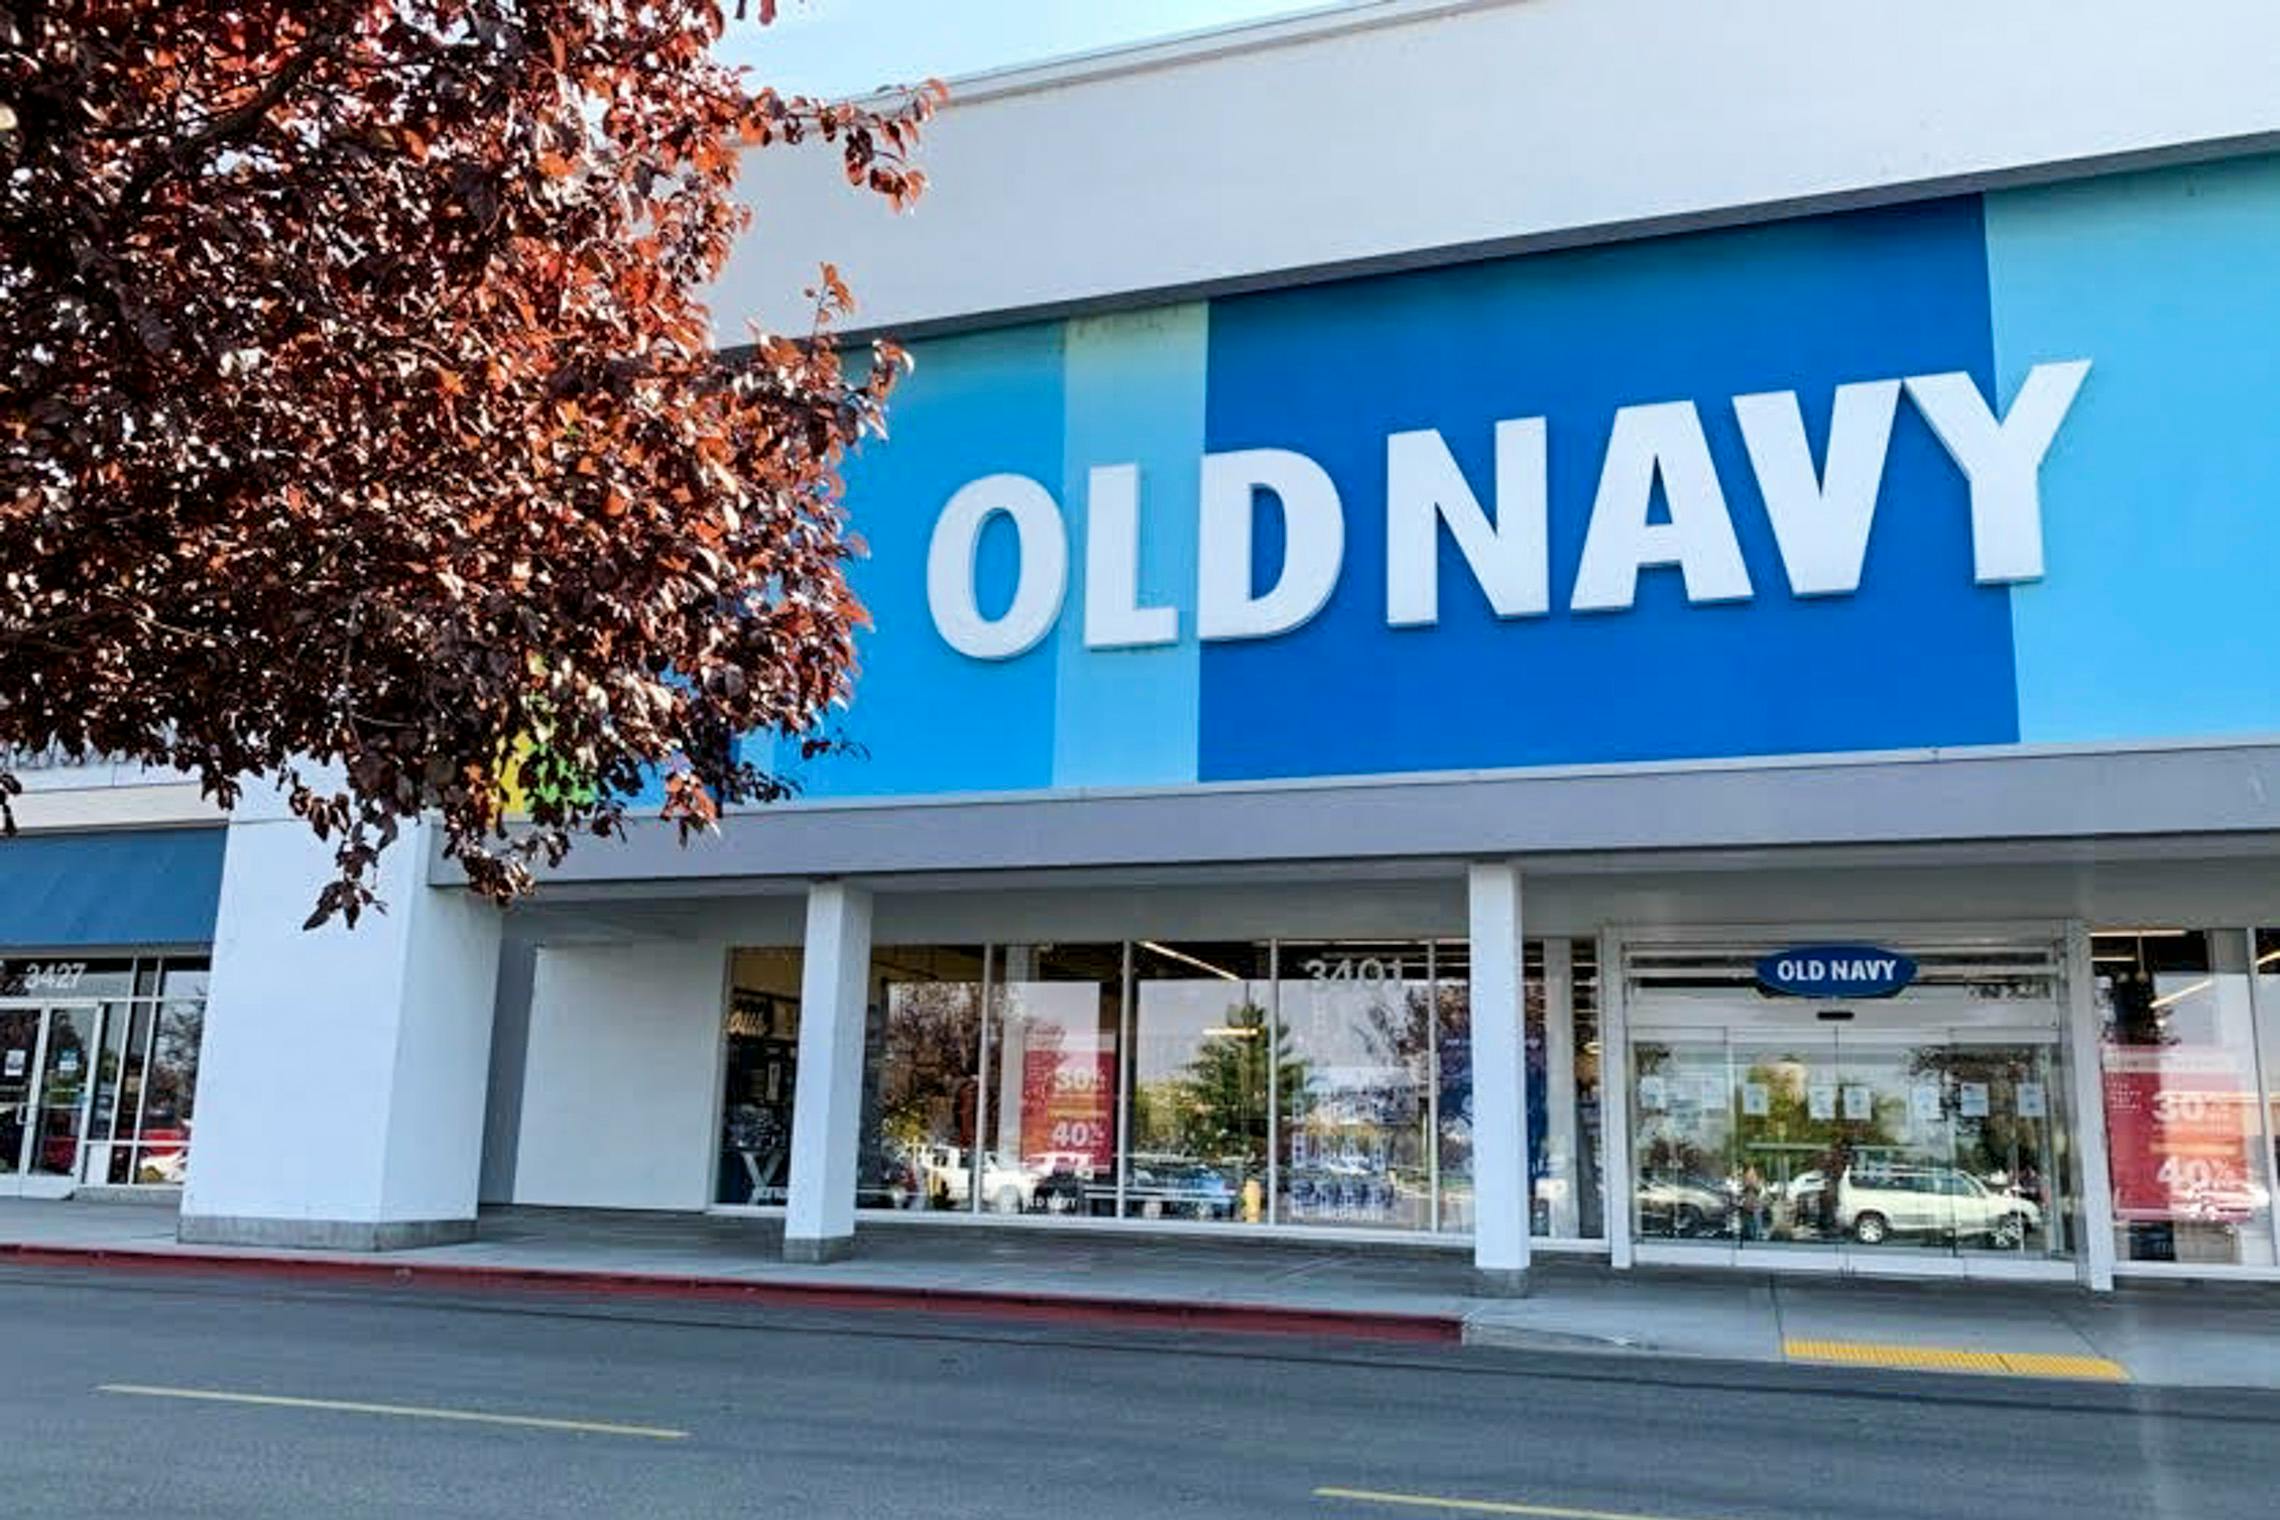 Front of the Old Navy store, street view